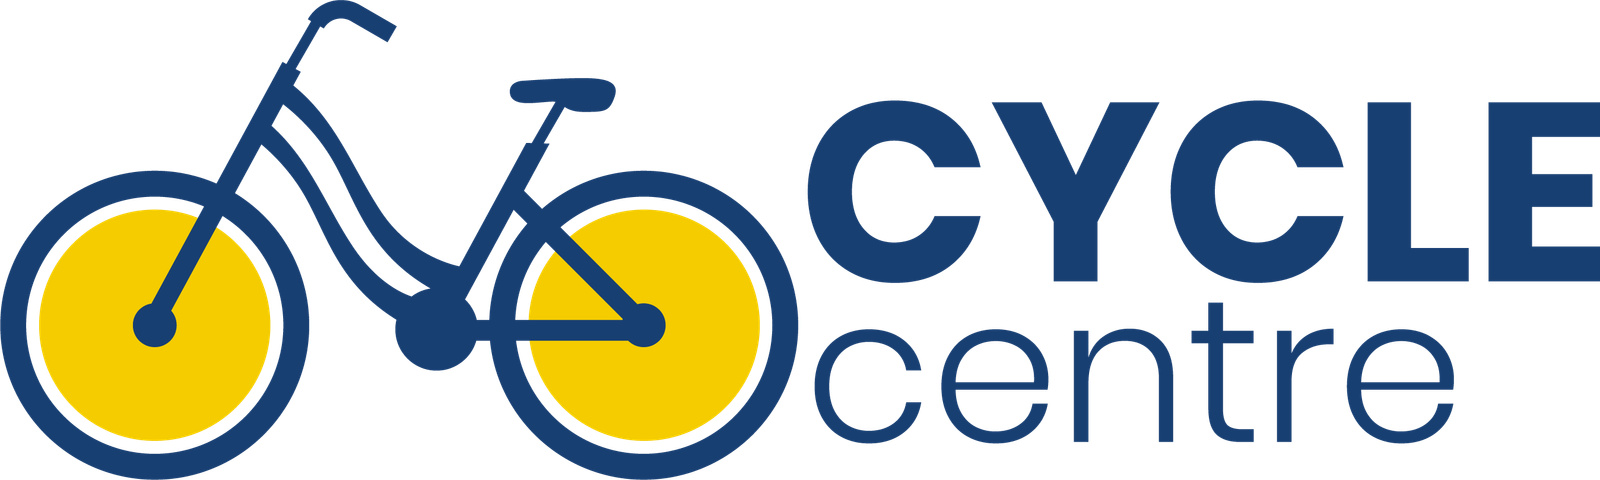 Cycle Center 75006